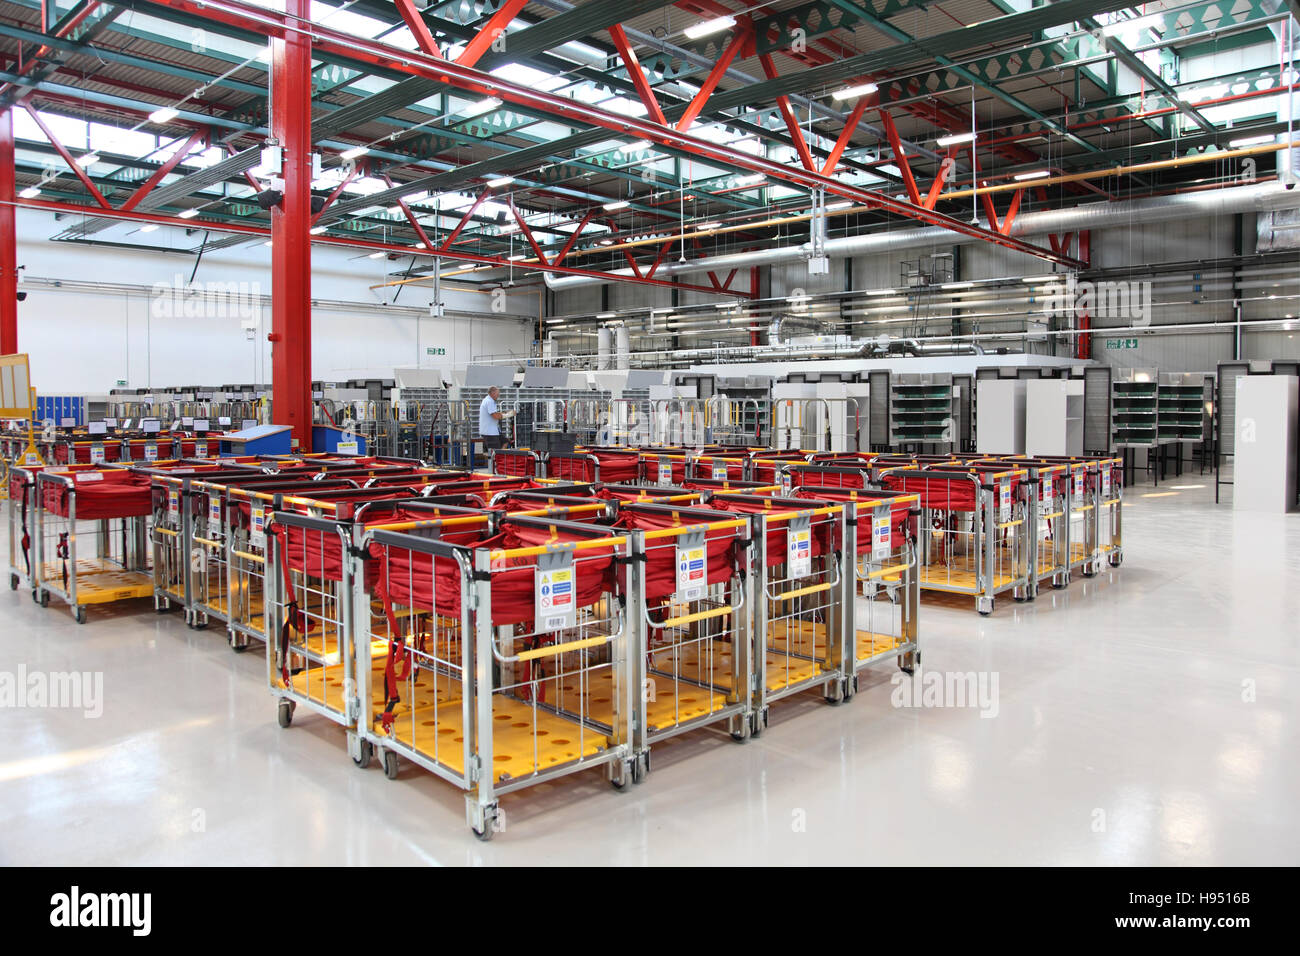 Empty mail trolleys awaiting use in a new Post Office sorting office in Southern England, UK Stock Photo